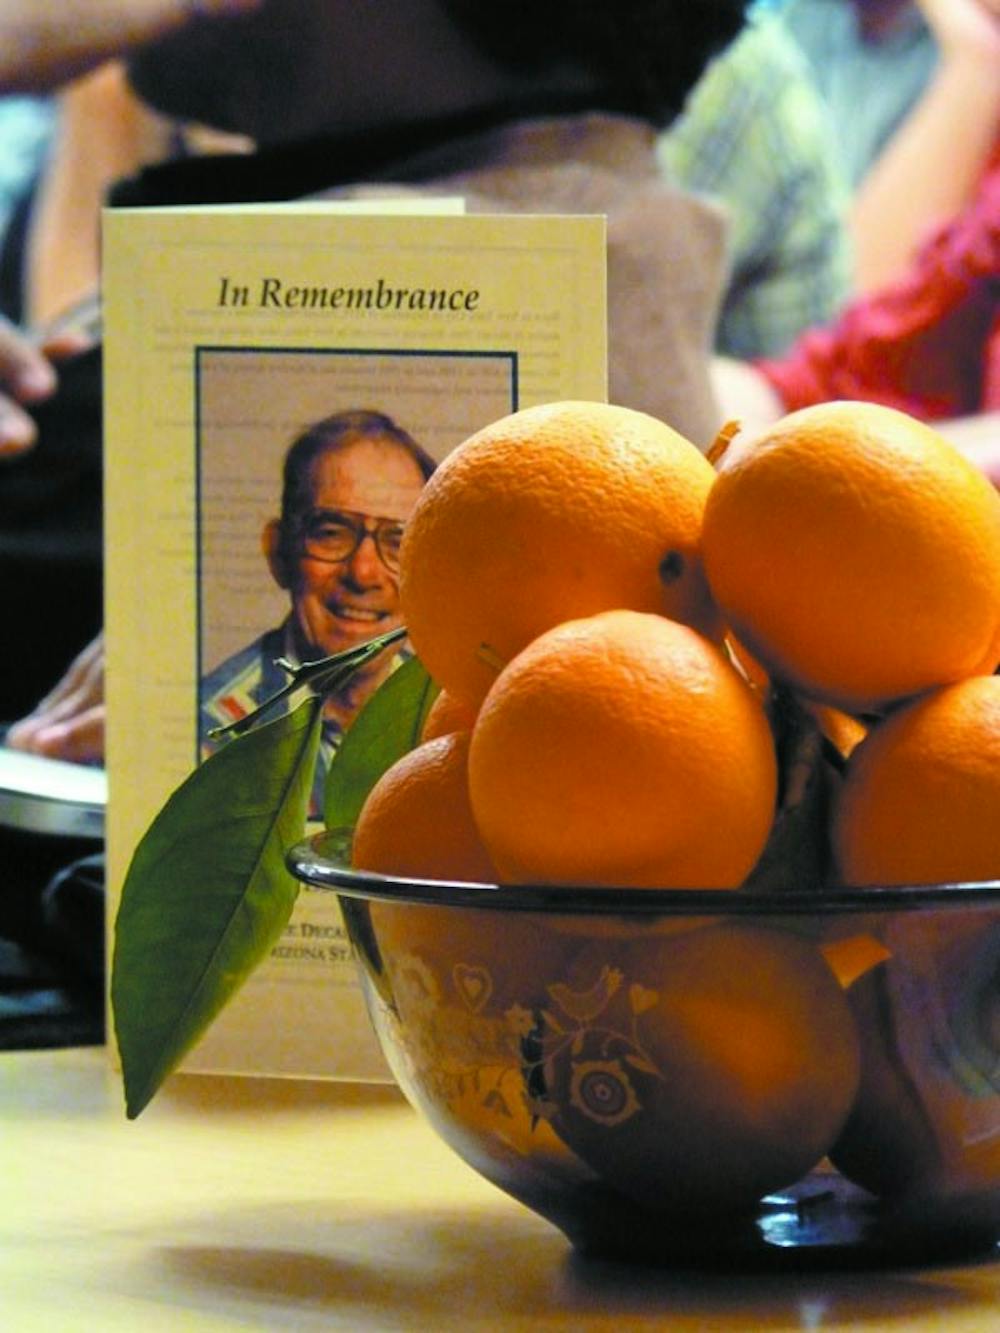 IN MEMORIUM: Co-workers and students held a memorial service for professor Don Miller, who often brought bowls of oranges from his garden to share with his classes. (Photo by Harmony Huskinson)